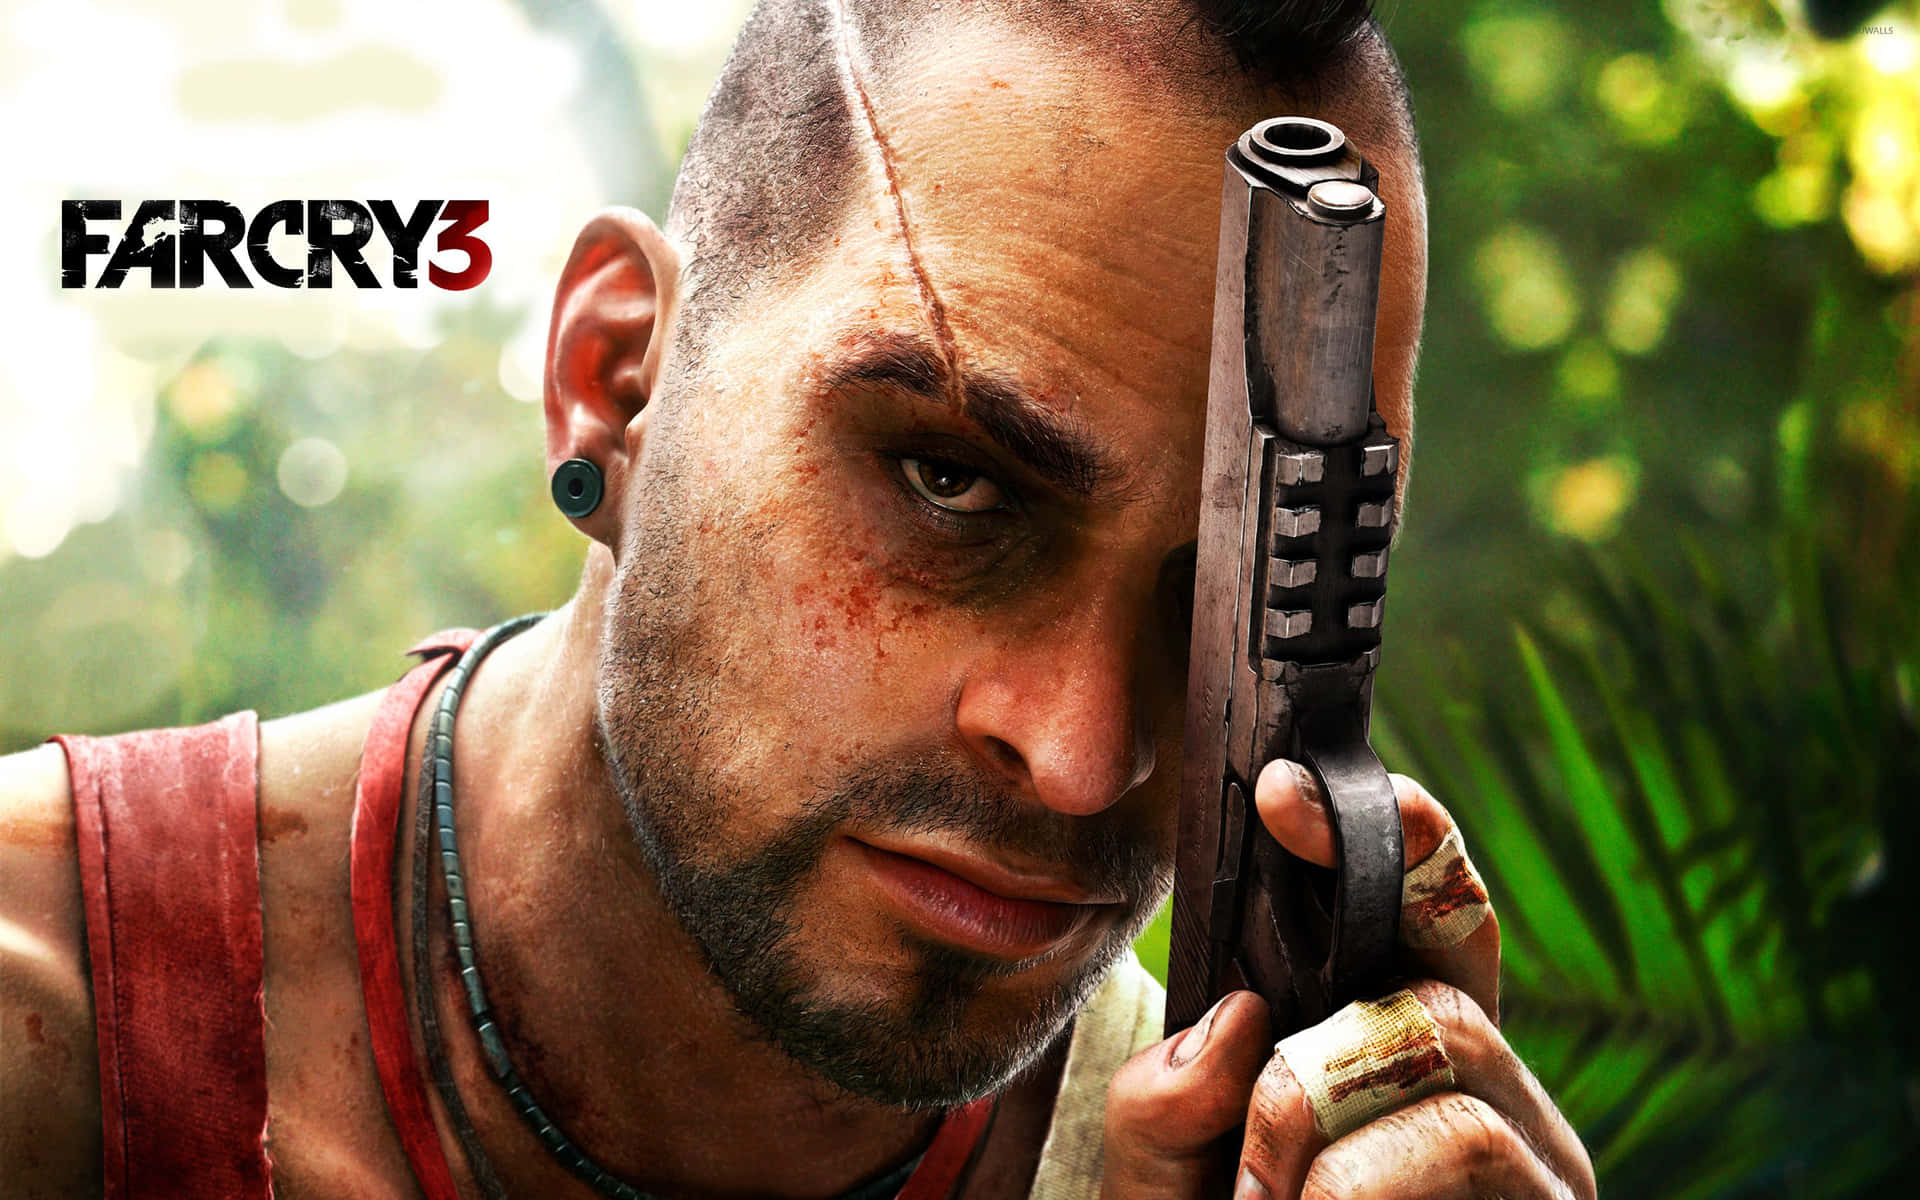 Free Far Cry 3 Vaas Wallpaper Downloads, [100+] Far Cry 3 Vaas Wallpapers  for FREE 